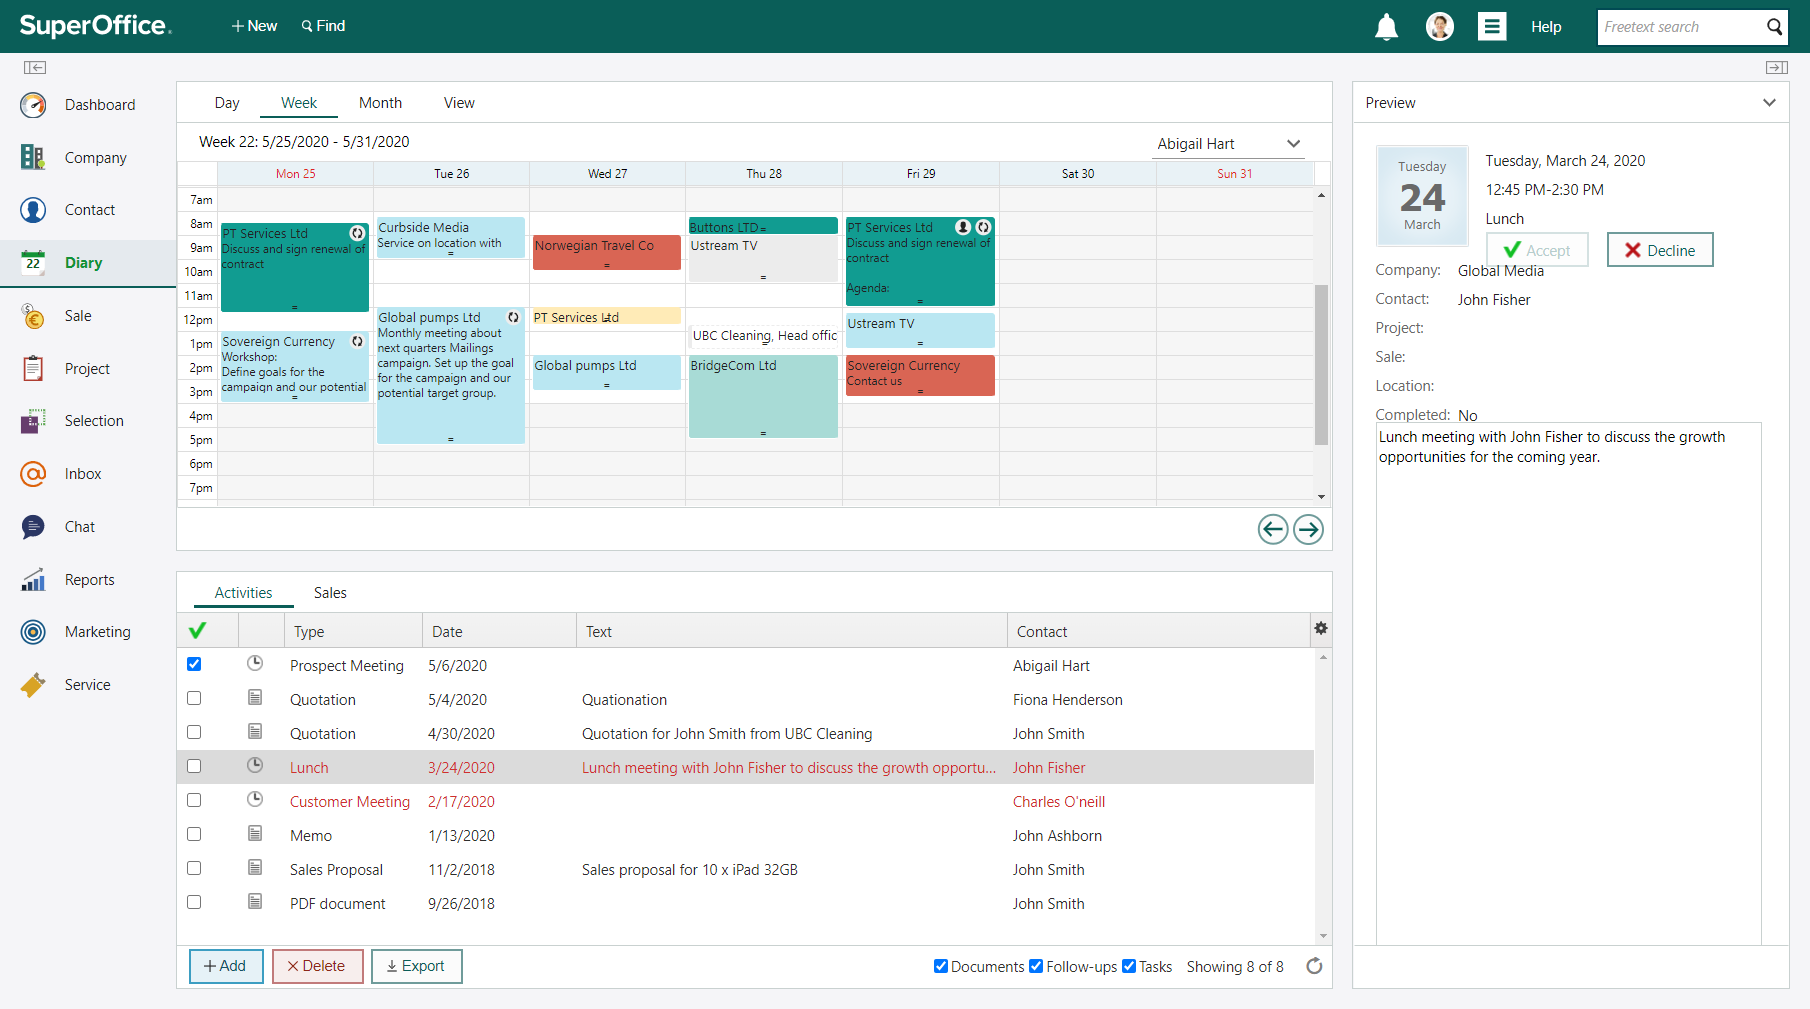 Keep track of all your appointments and tasks by registering them in your diary